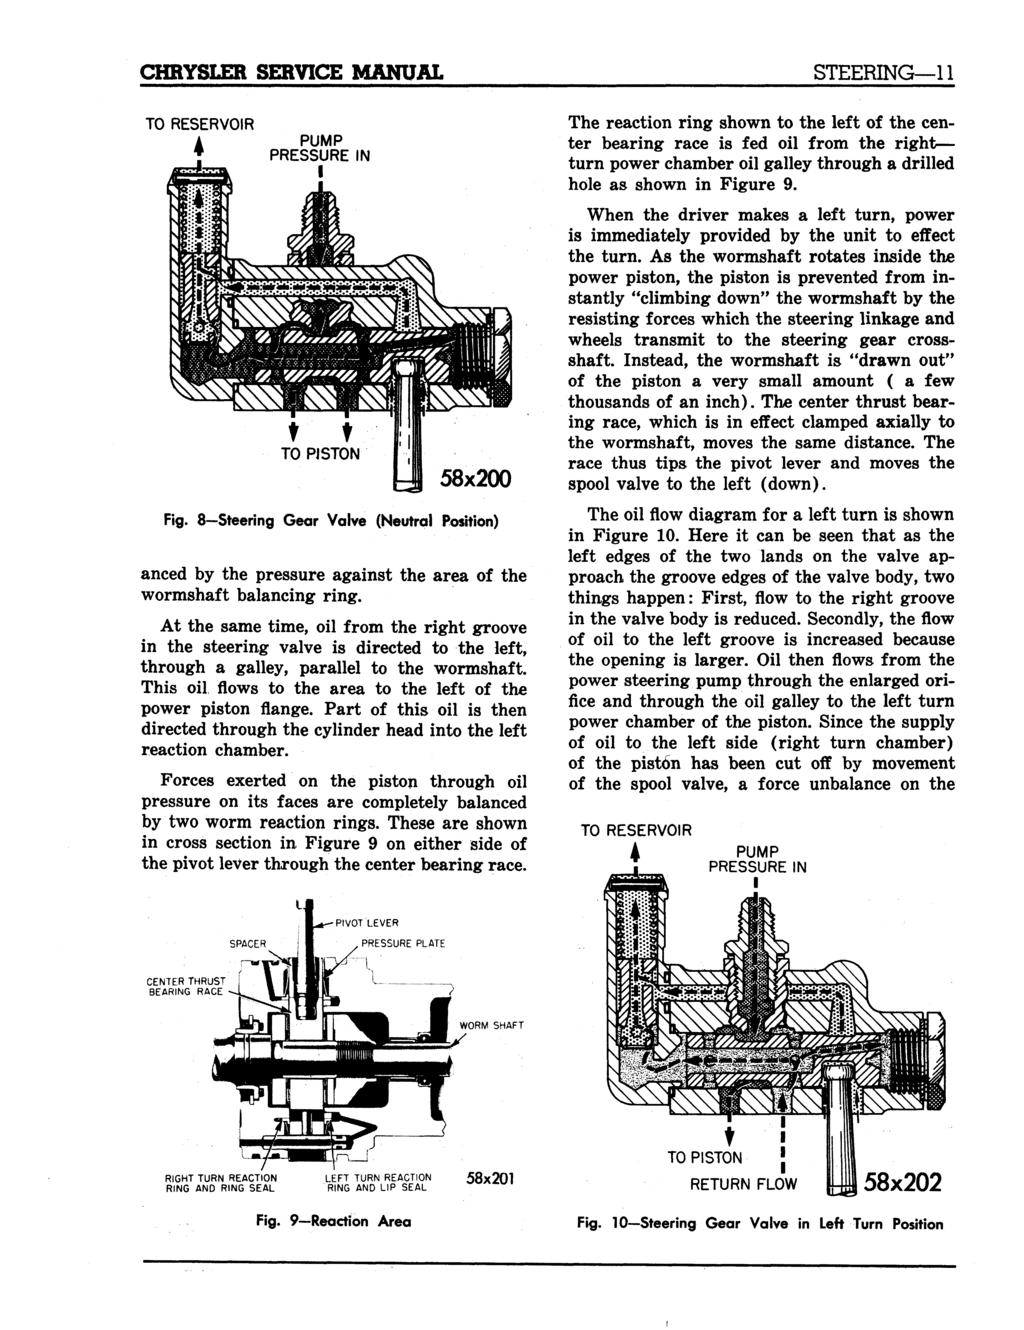 CHRYSLER SERVICE MANUAL TO RESERVOIR 4 PUMP PRESSURE IN 58x200 Fig. 8-Steering Gear Valve (Neutral Position) anced by the pressure against the area of the wormshaft balancing ring.